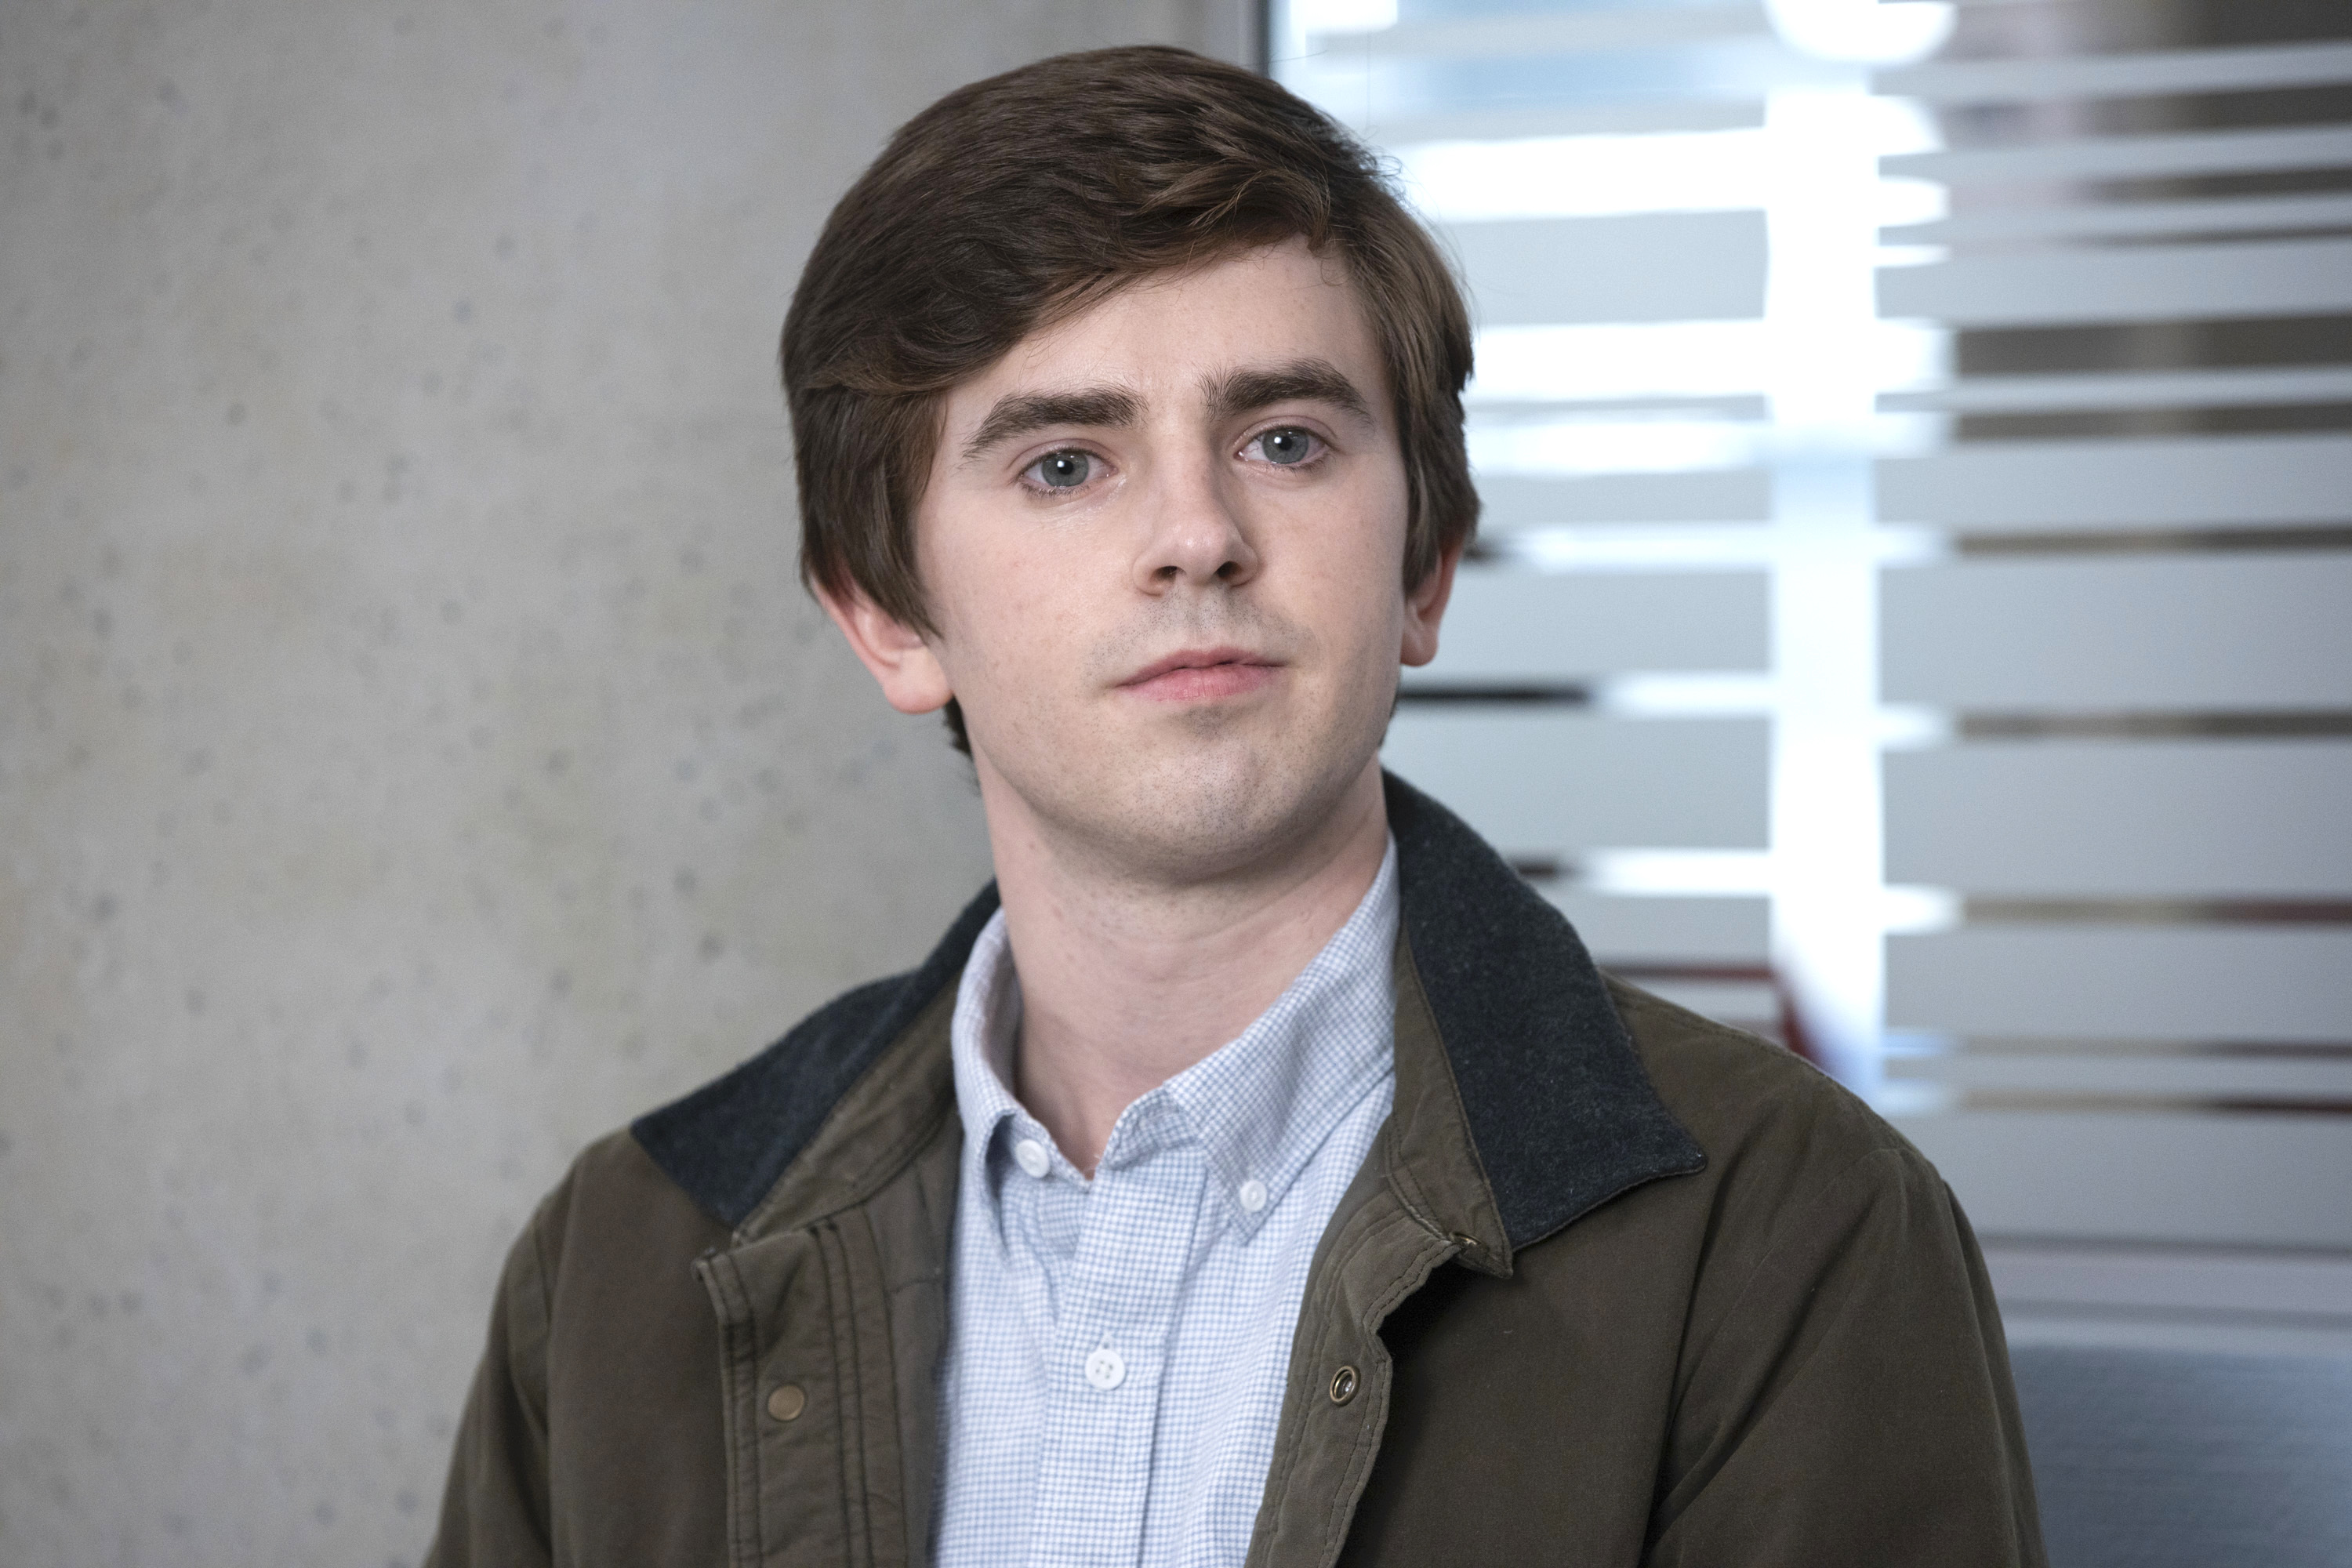 A still from the TV show 'The Good Doctor' showing the main character Dr. Shaun Murphy played by Freddie Highmore.